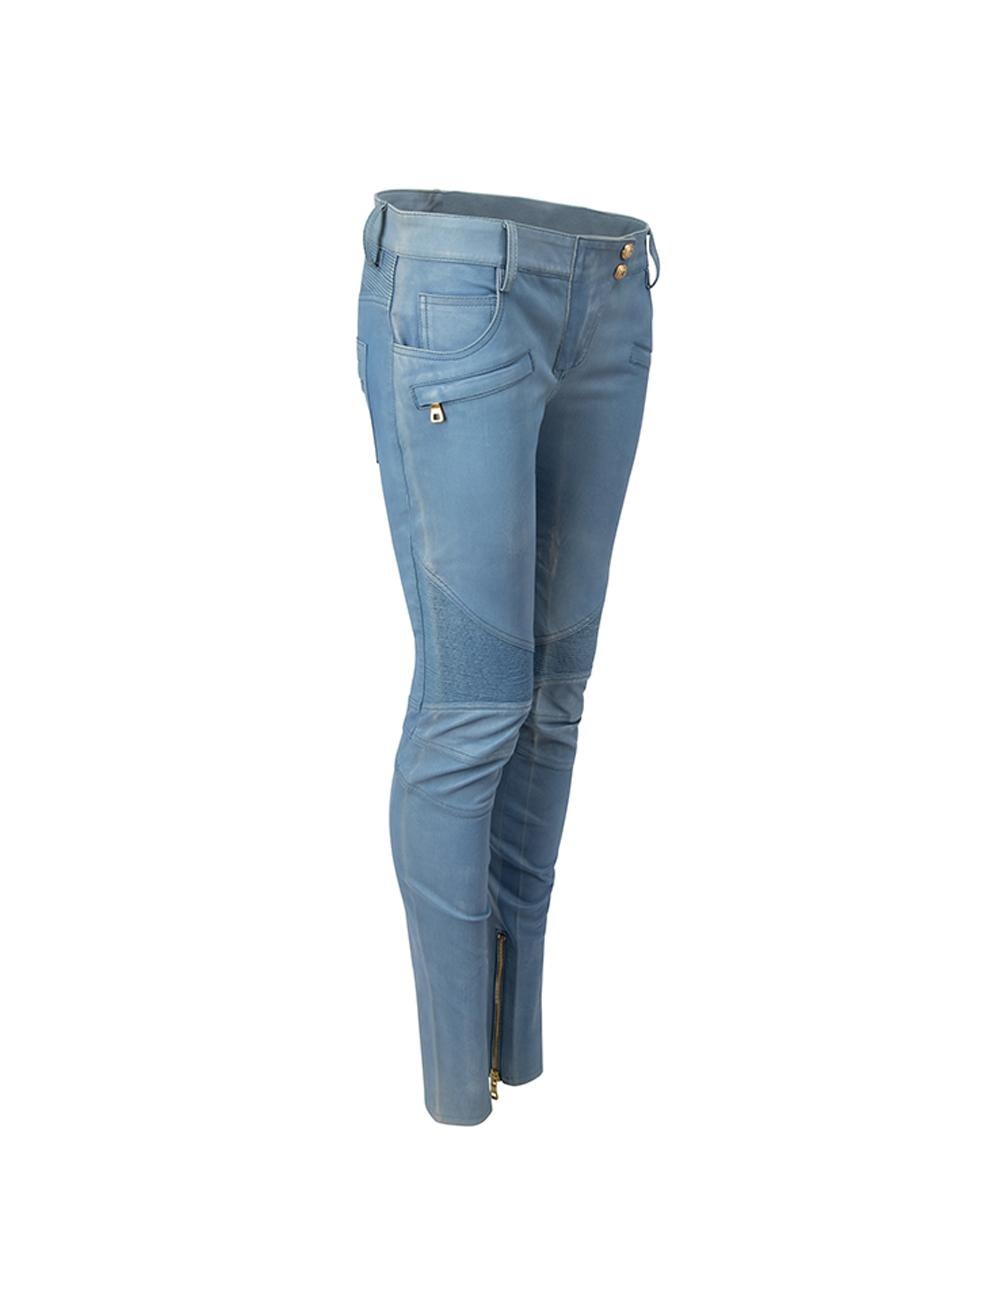 CONDITION is Good. Minor wear to trousers is evident. Light wear to right-side below the waist with dark mark and white scuffs to the rear right leg on this used Balmain designer resale item. 



Details


Blue

Leather

Biker skinny trousers

Mid